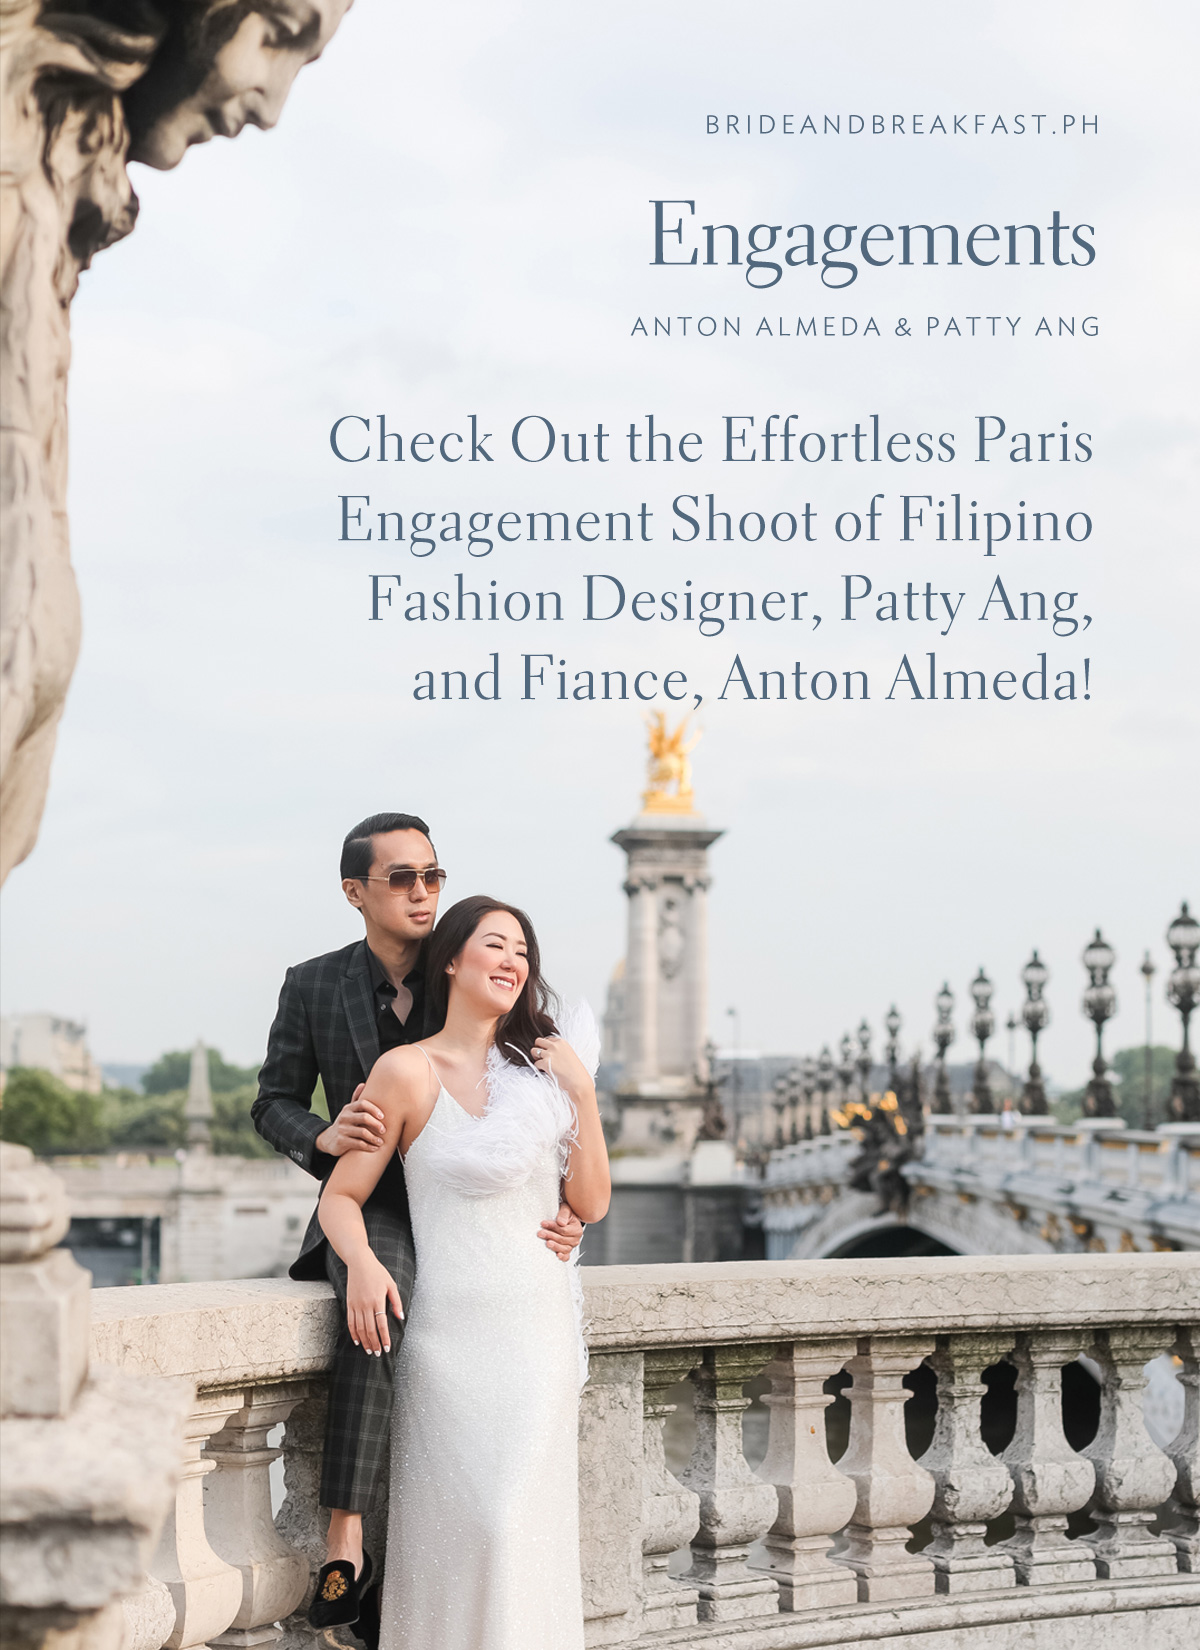 Check Out the Effortless Paris Engagement Shoot of Filipino Fashion Designer, Patty Ang, and Fiance, Anton Almeda!